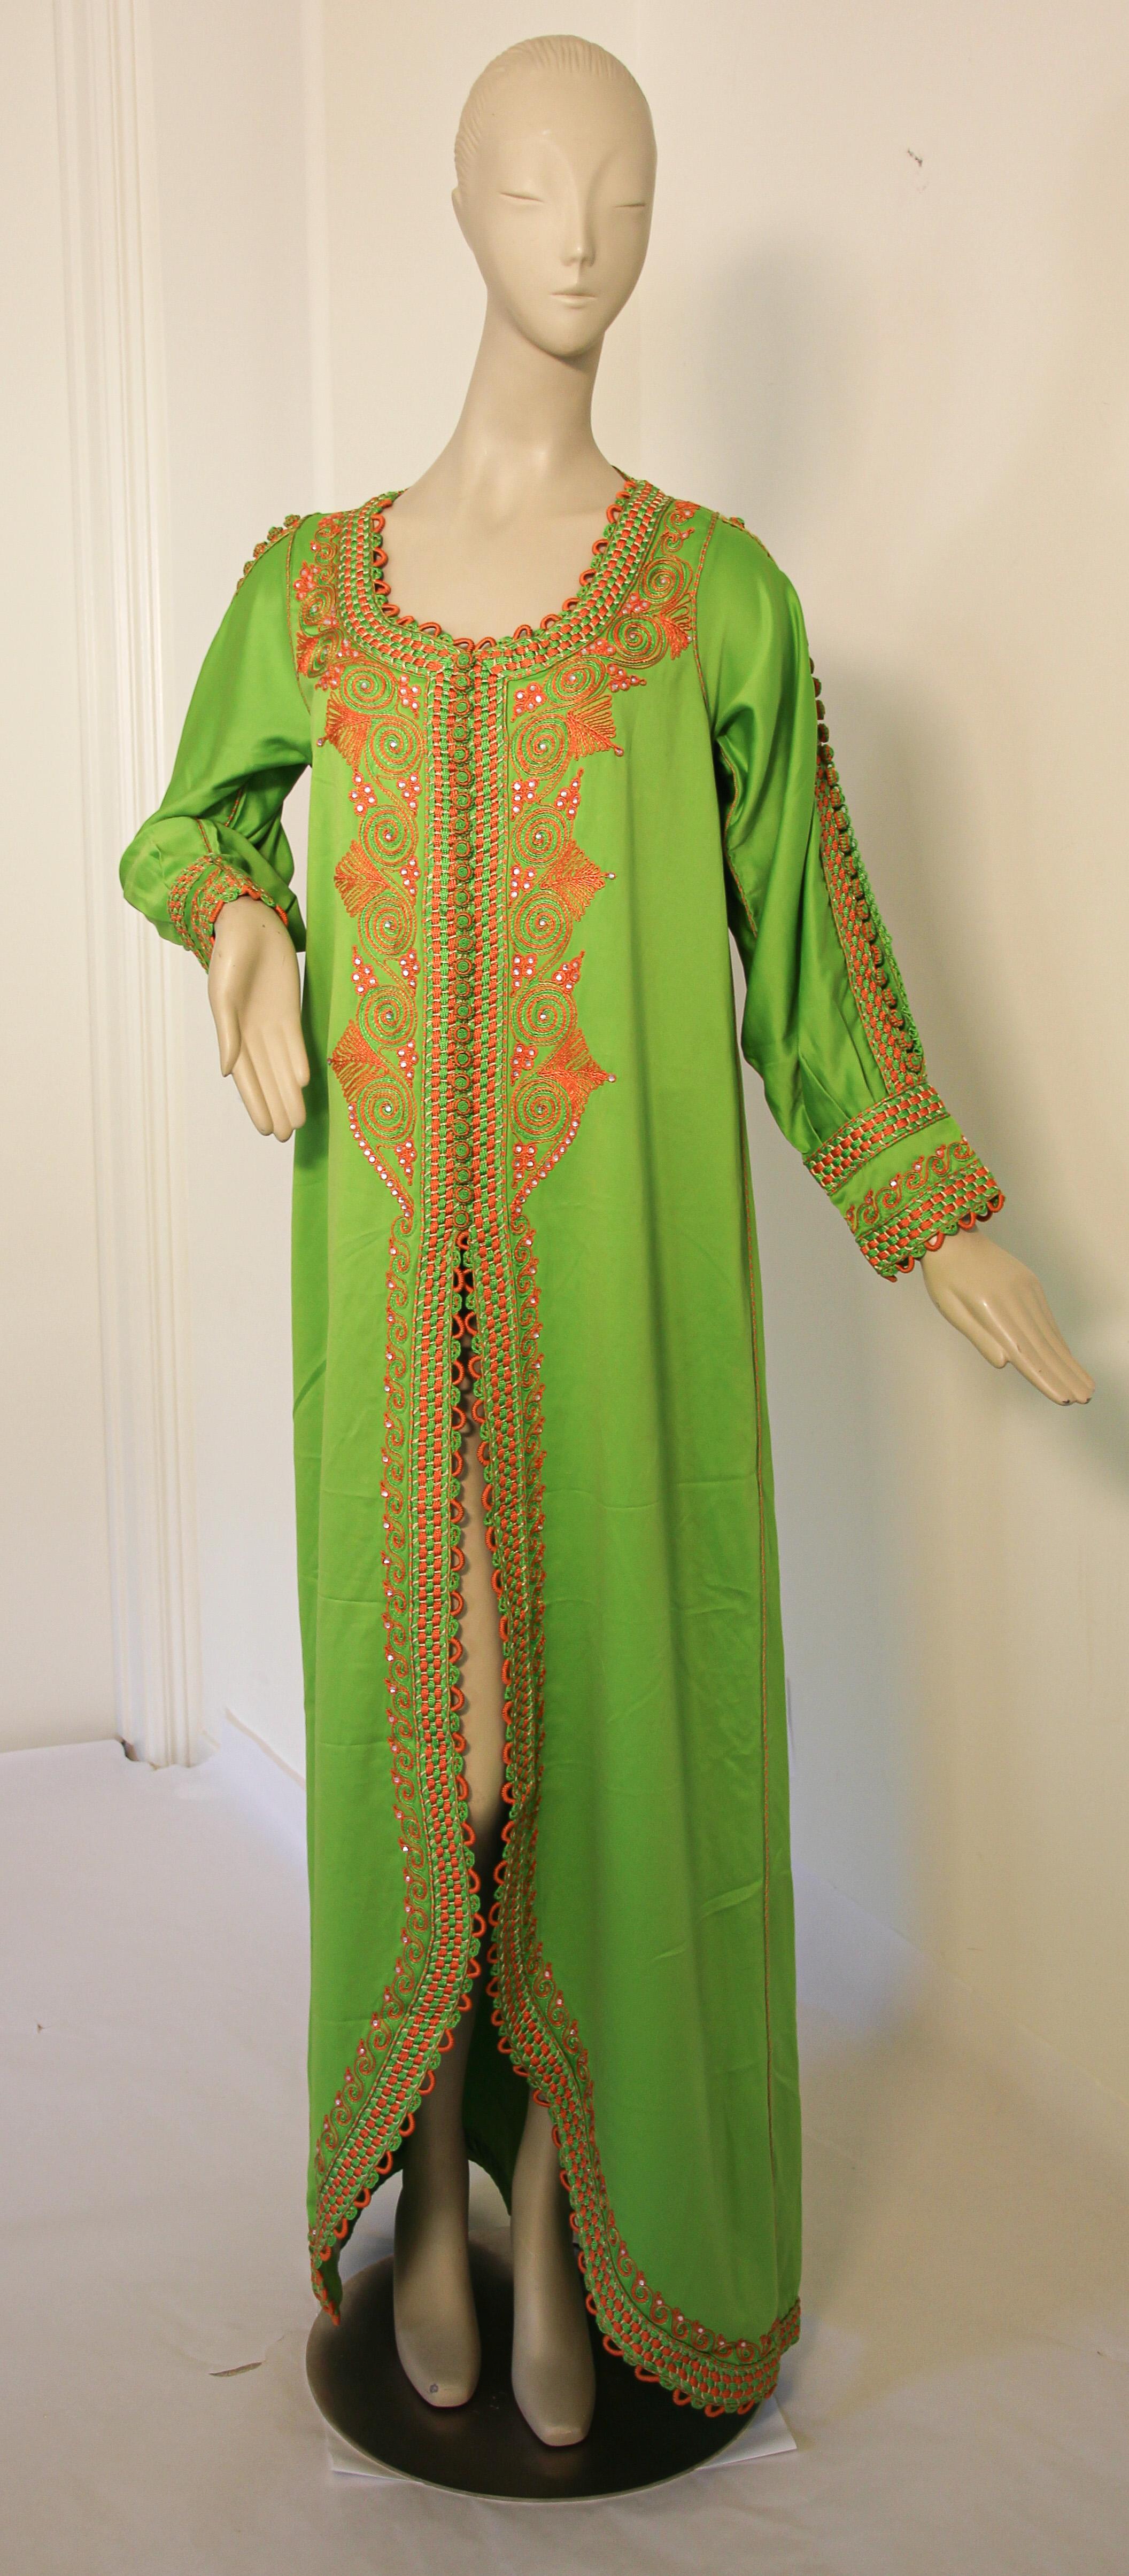 Elegant Moroccan caftan in Kelly green and orange embroidered.
circa 1970s.
This long maxi dress kaftan is embroidered and embellished entirely by hand.
It’s crafted in Morocco and tailored for a relaxed fit.
One of a kind evening Moroccan